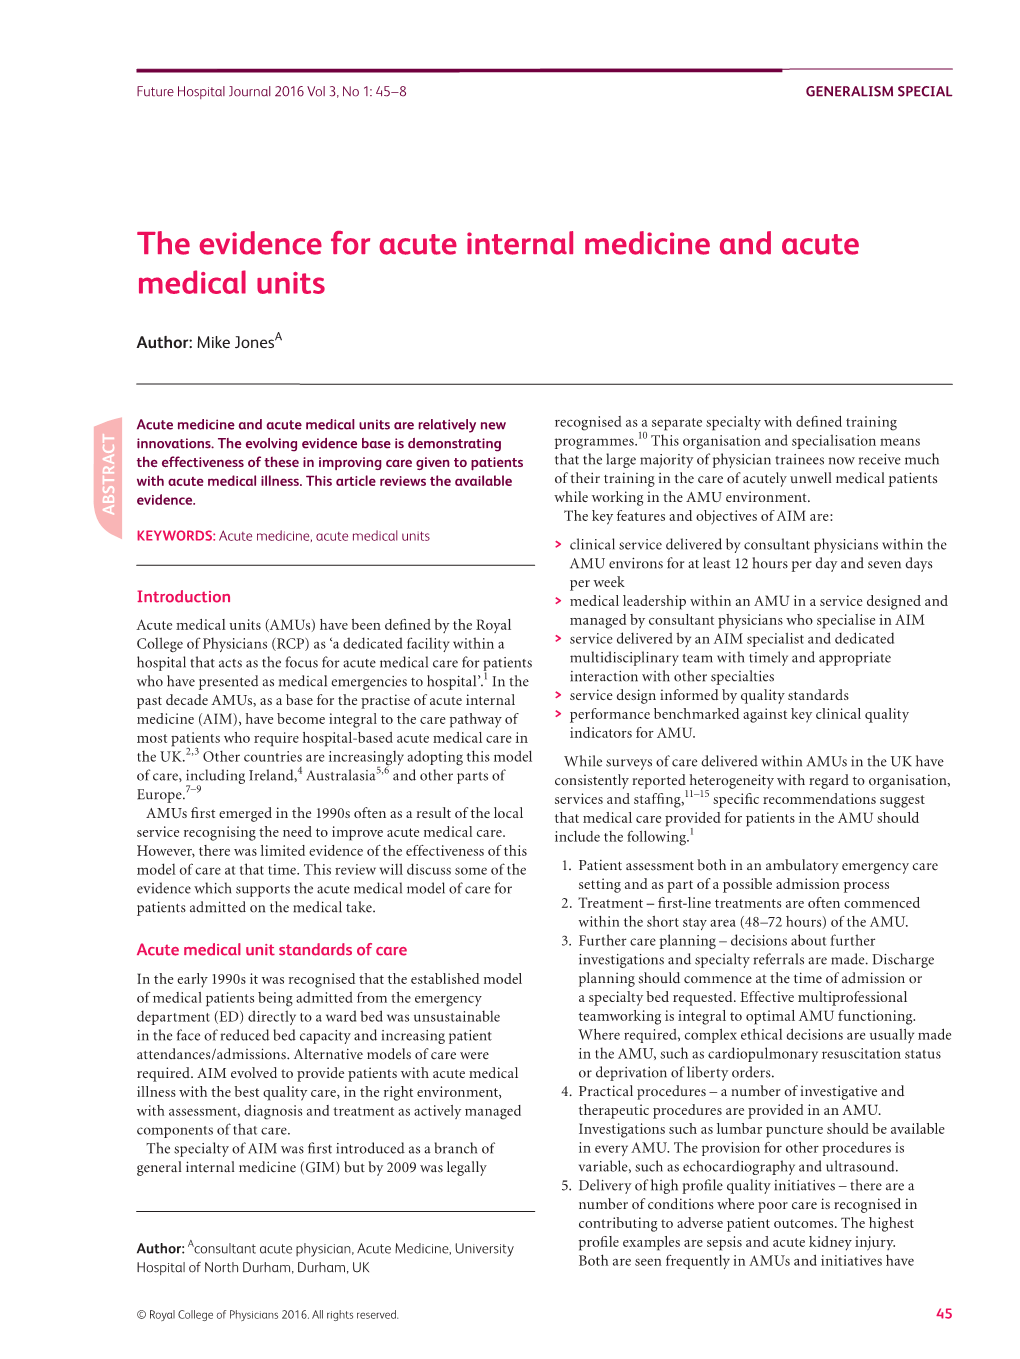 The Evidence for Acute Internal Medicine and Acute Medical Units